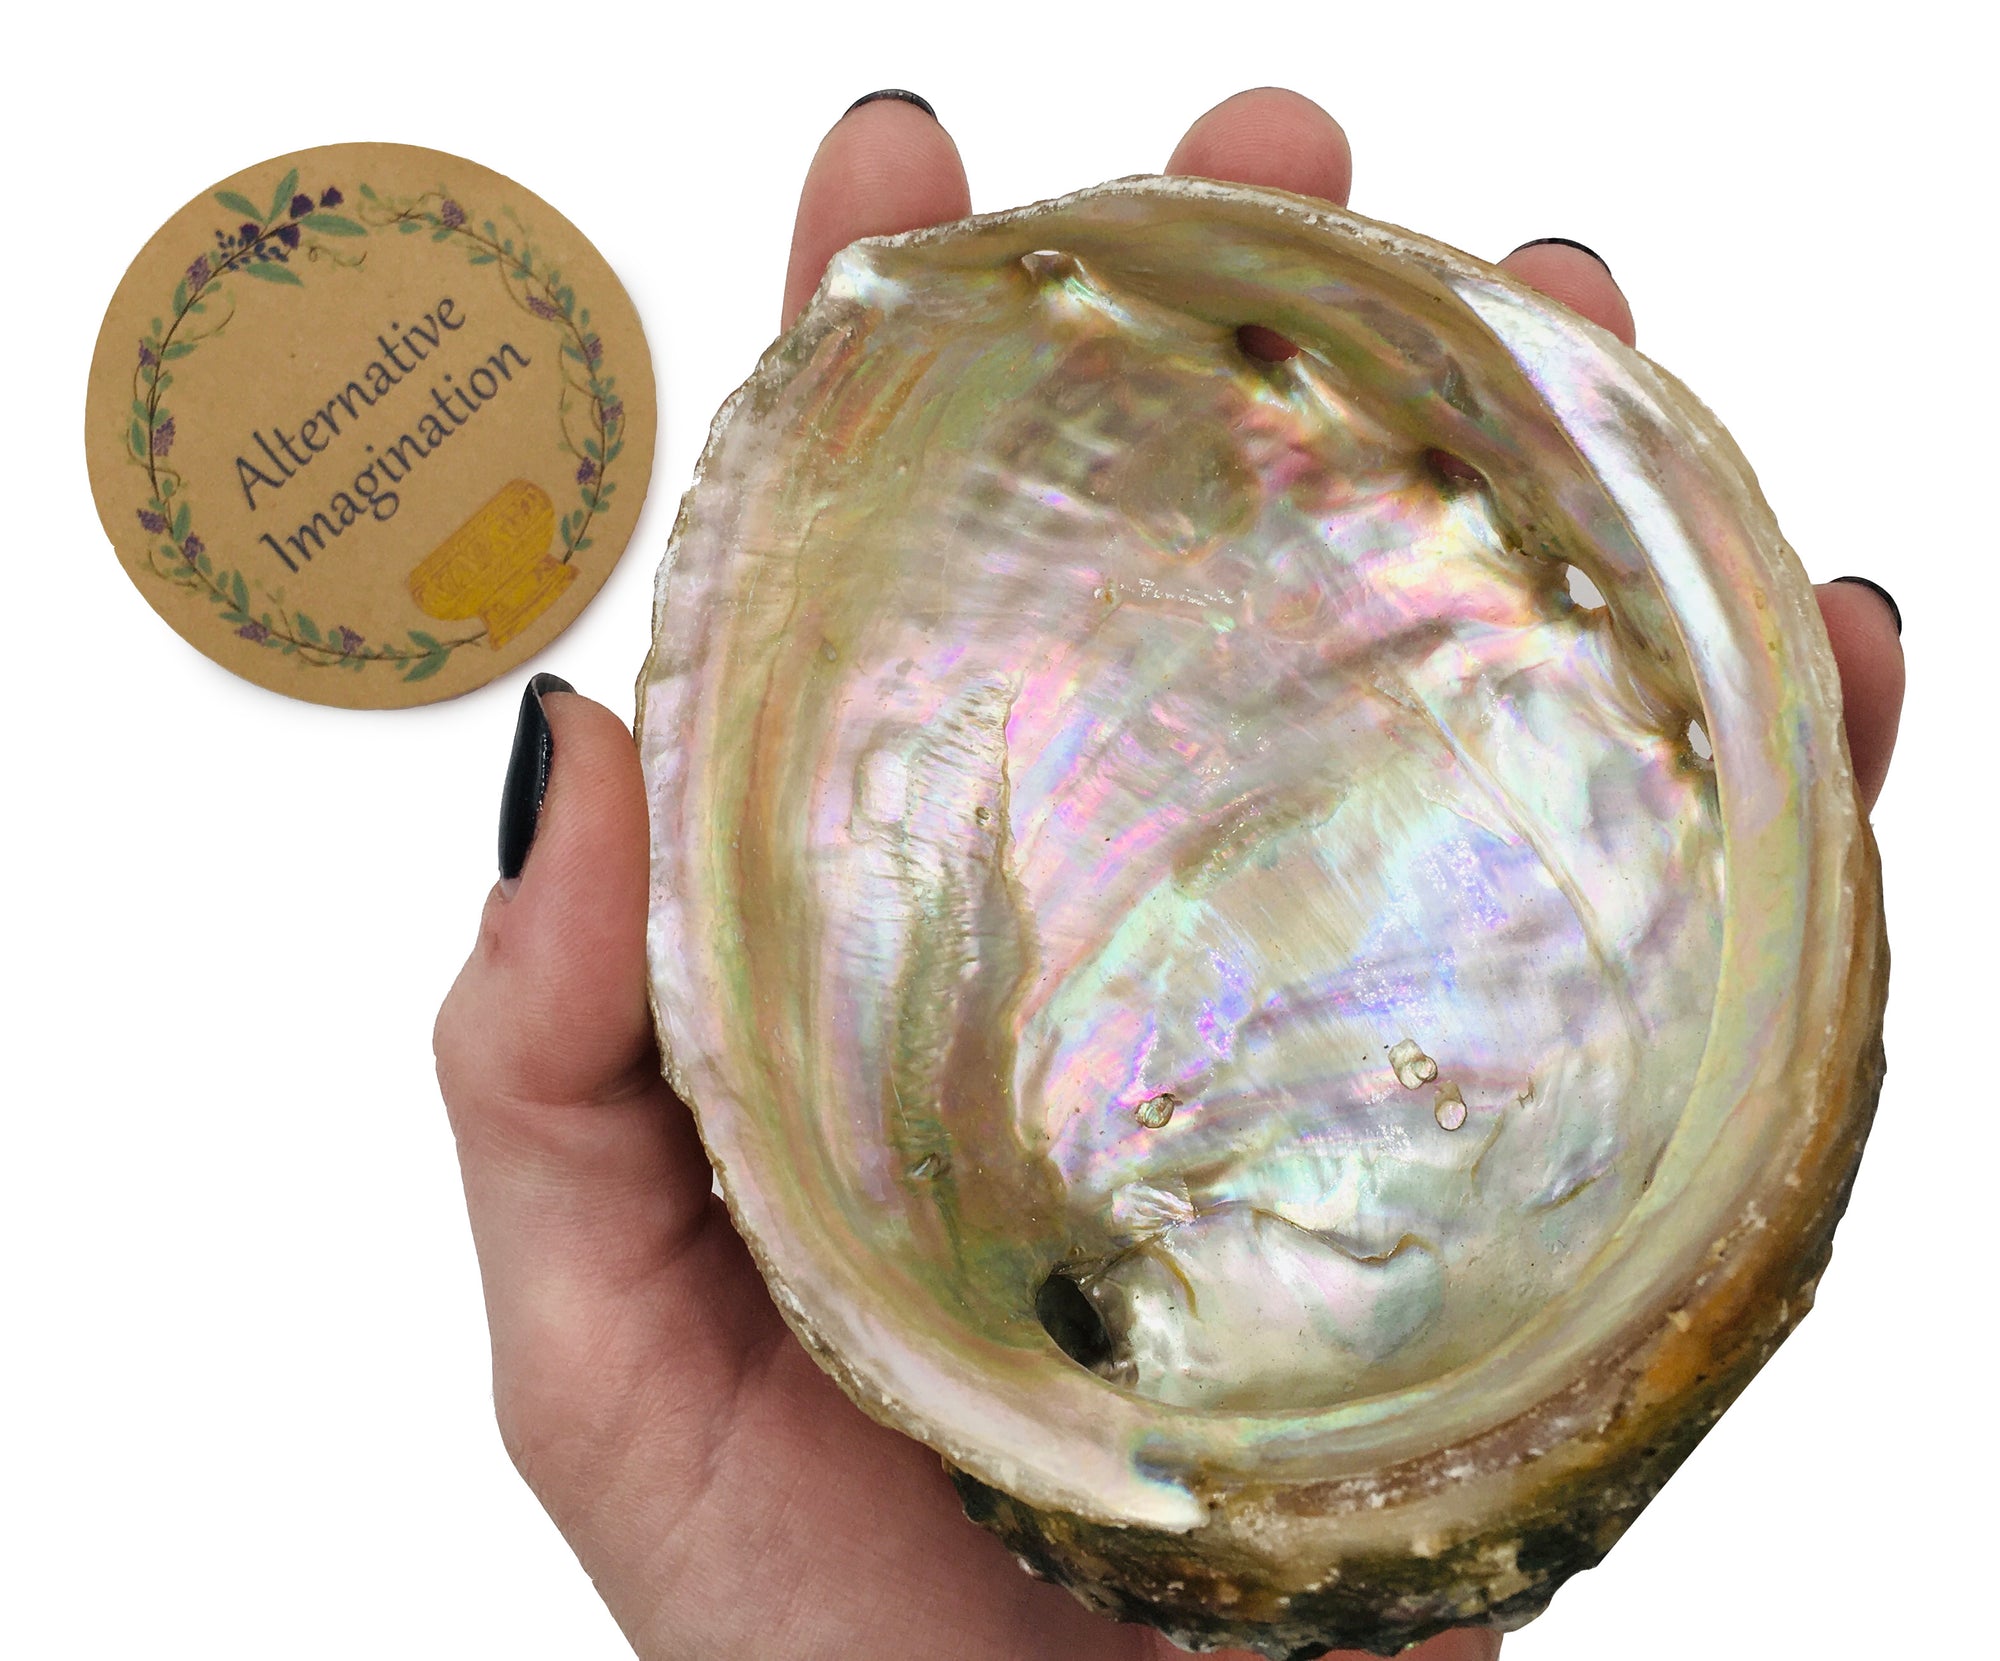 4" Mini Hand-selected Premium Abalone Shell with 4" Wooden Cobra Stand